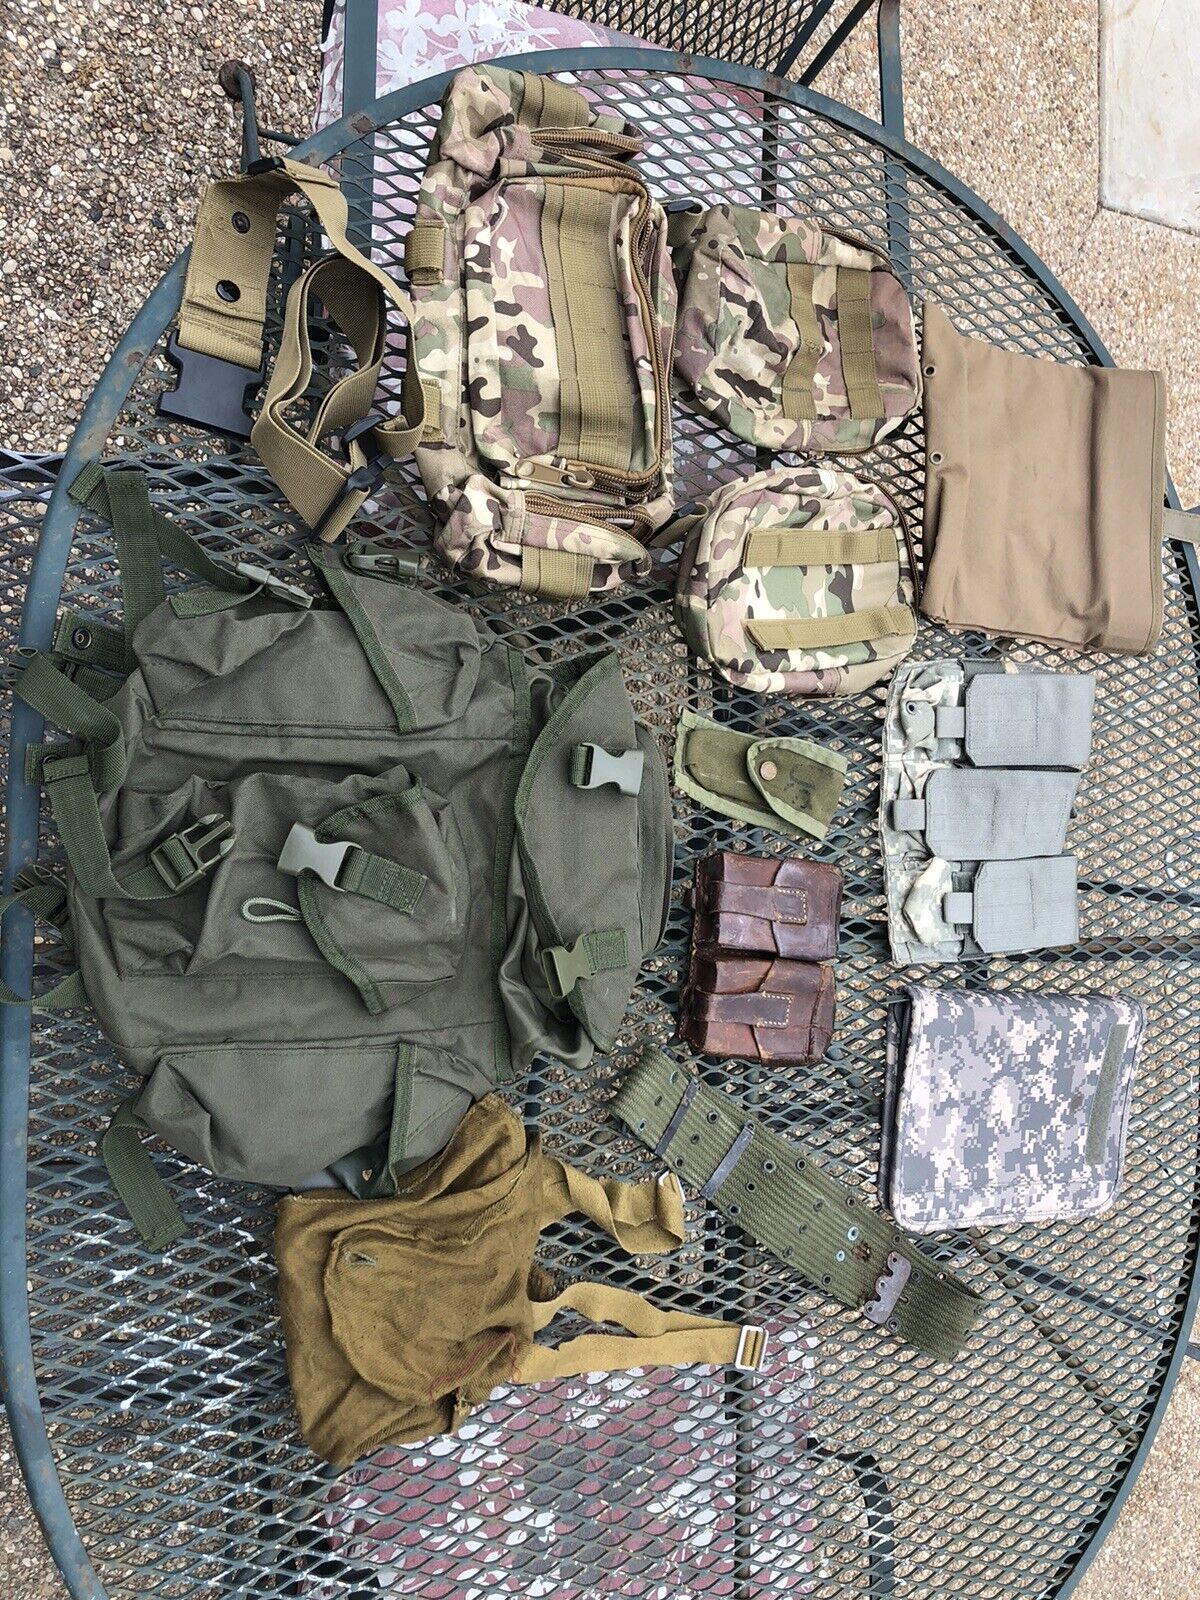 Assorted military items , used military gear.